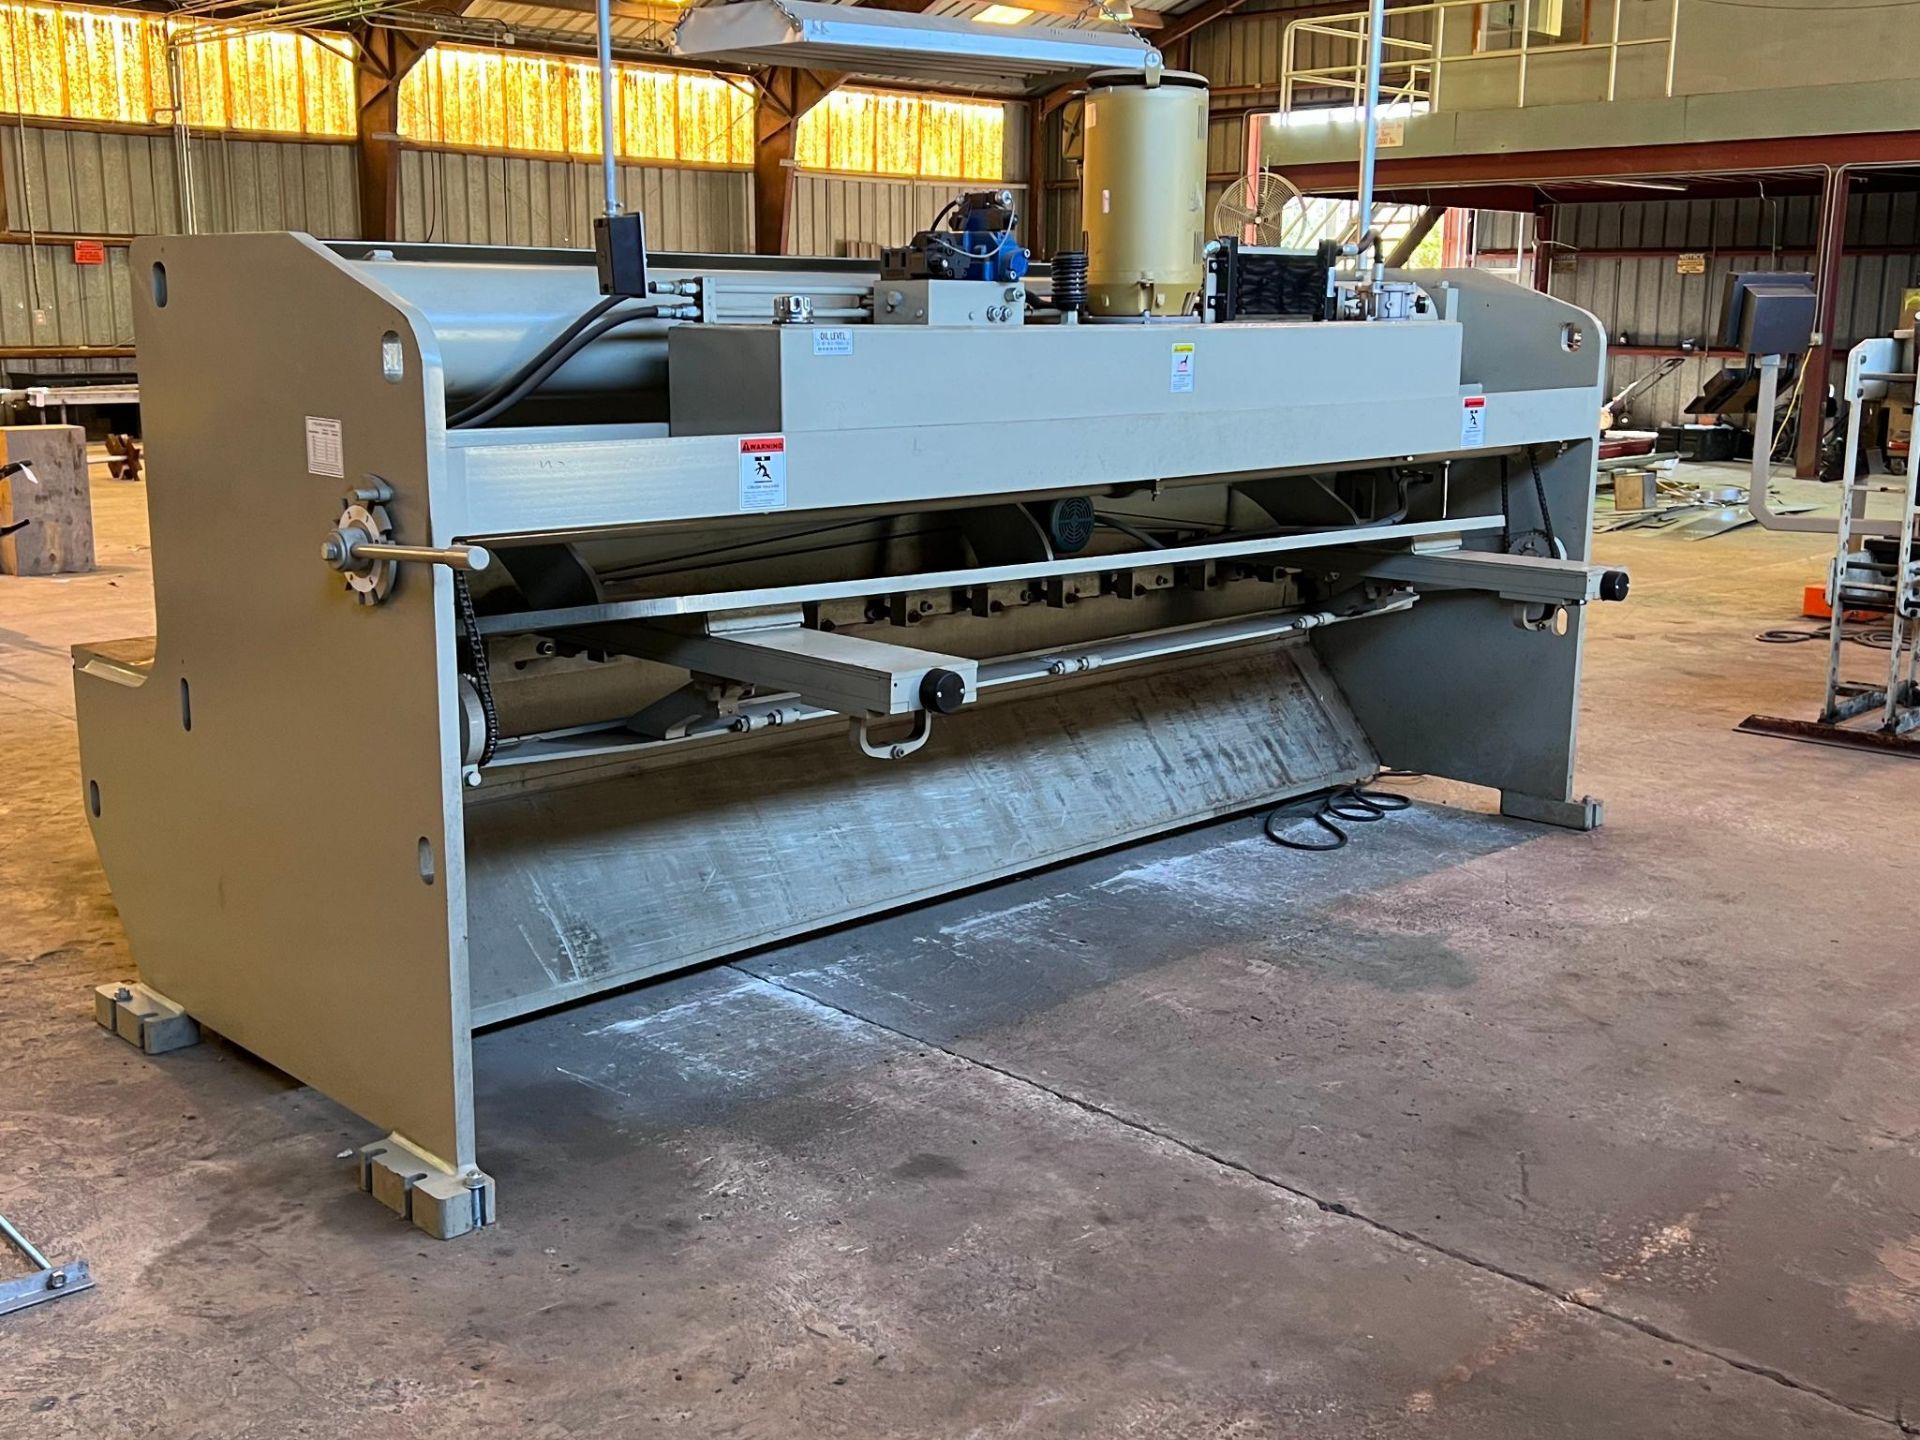 2019 Accurshear 625012 Hydraulic Power Squaring Shear Serial Number 7281 Thickness: .25" Mild Steel - Image 4 of 29